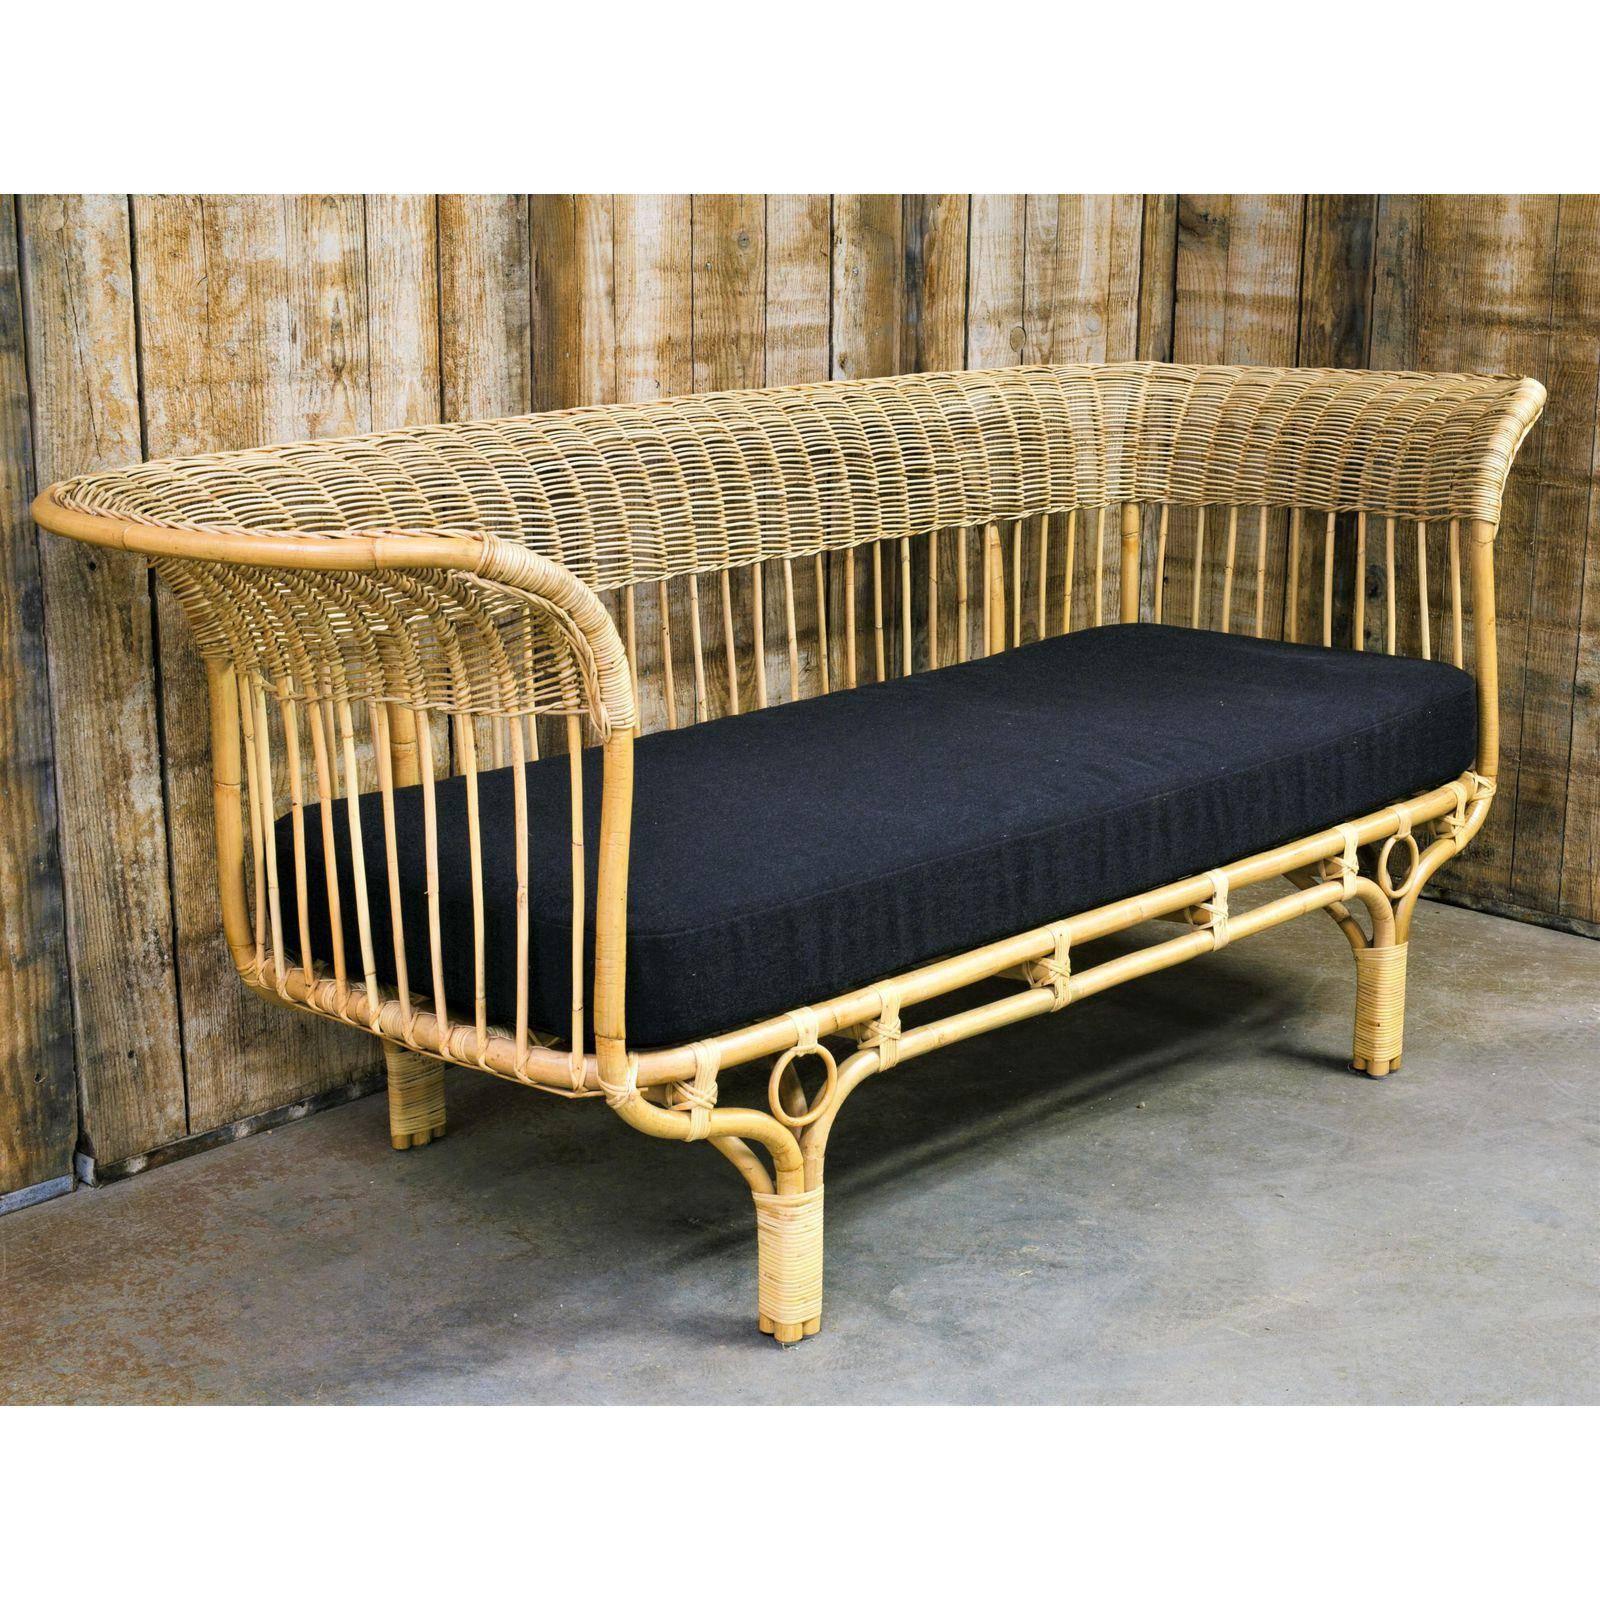 Woven rattan sofa, originally designed by Franco Albini in 1951. New construction for indoor use with new upholstered cushion in a dark greyish-black woven fabric. A classic and iconic design. Measure: Seat height listed is including cushion, frame